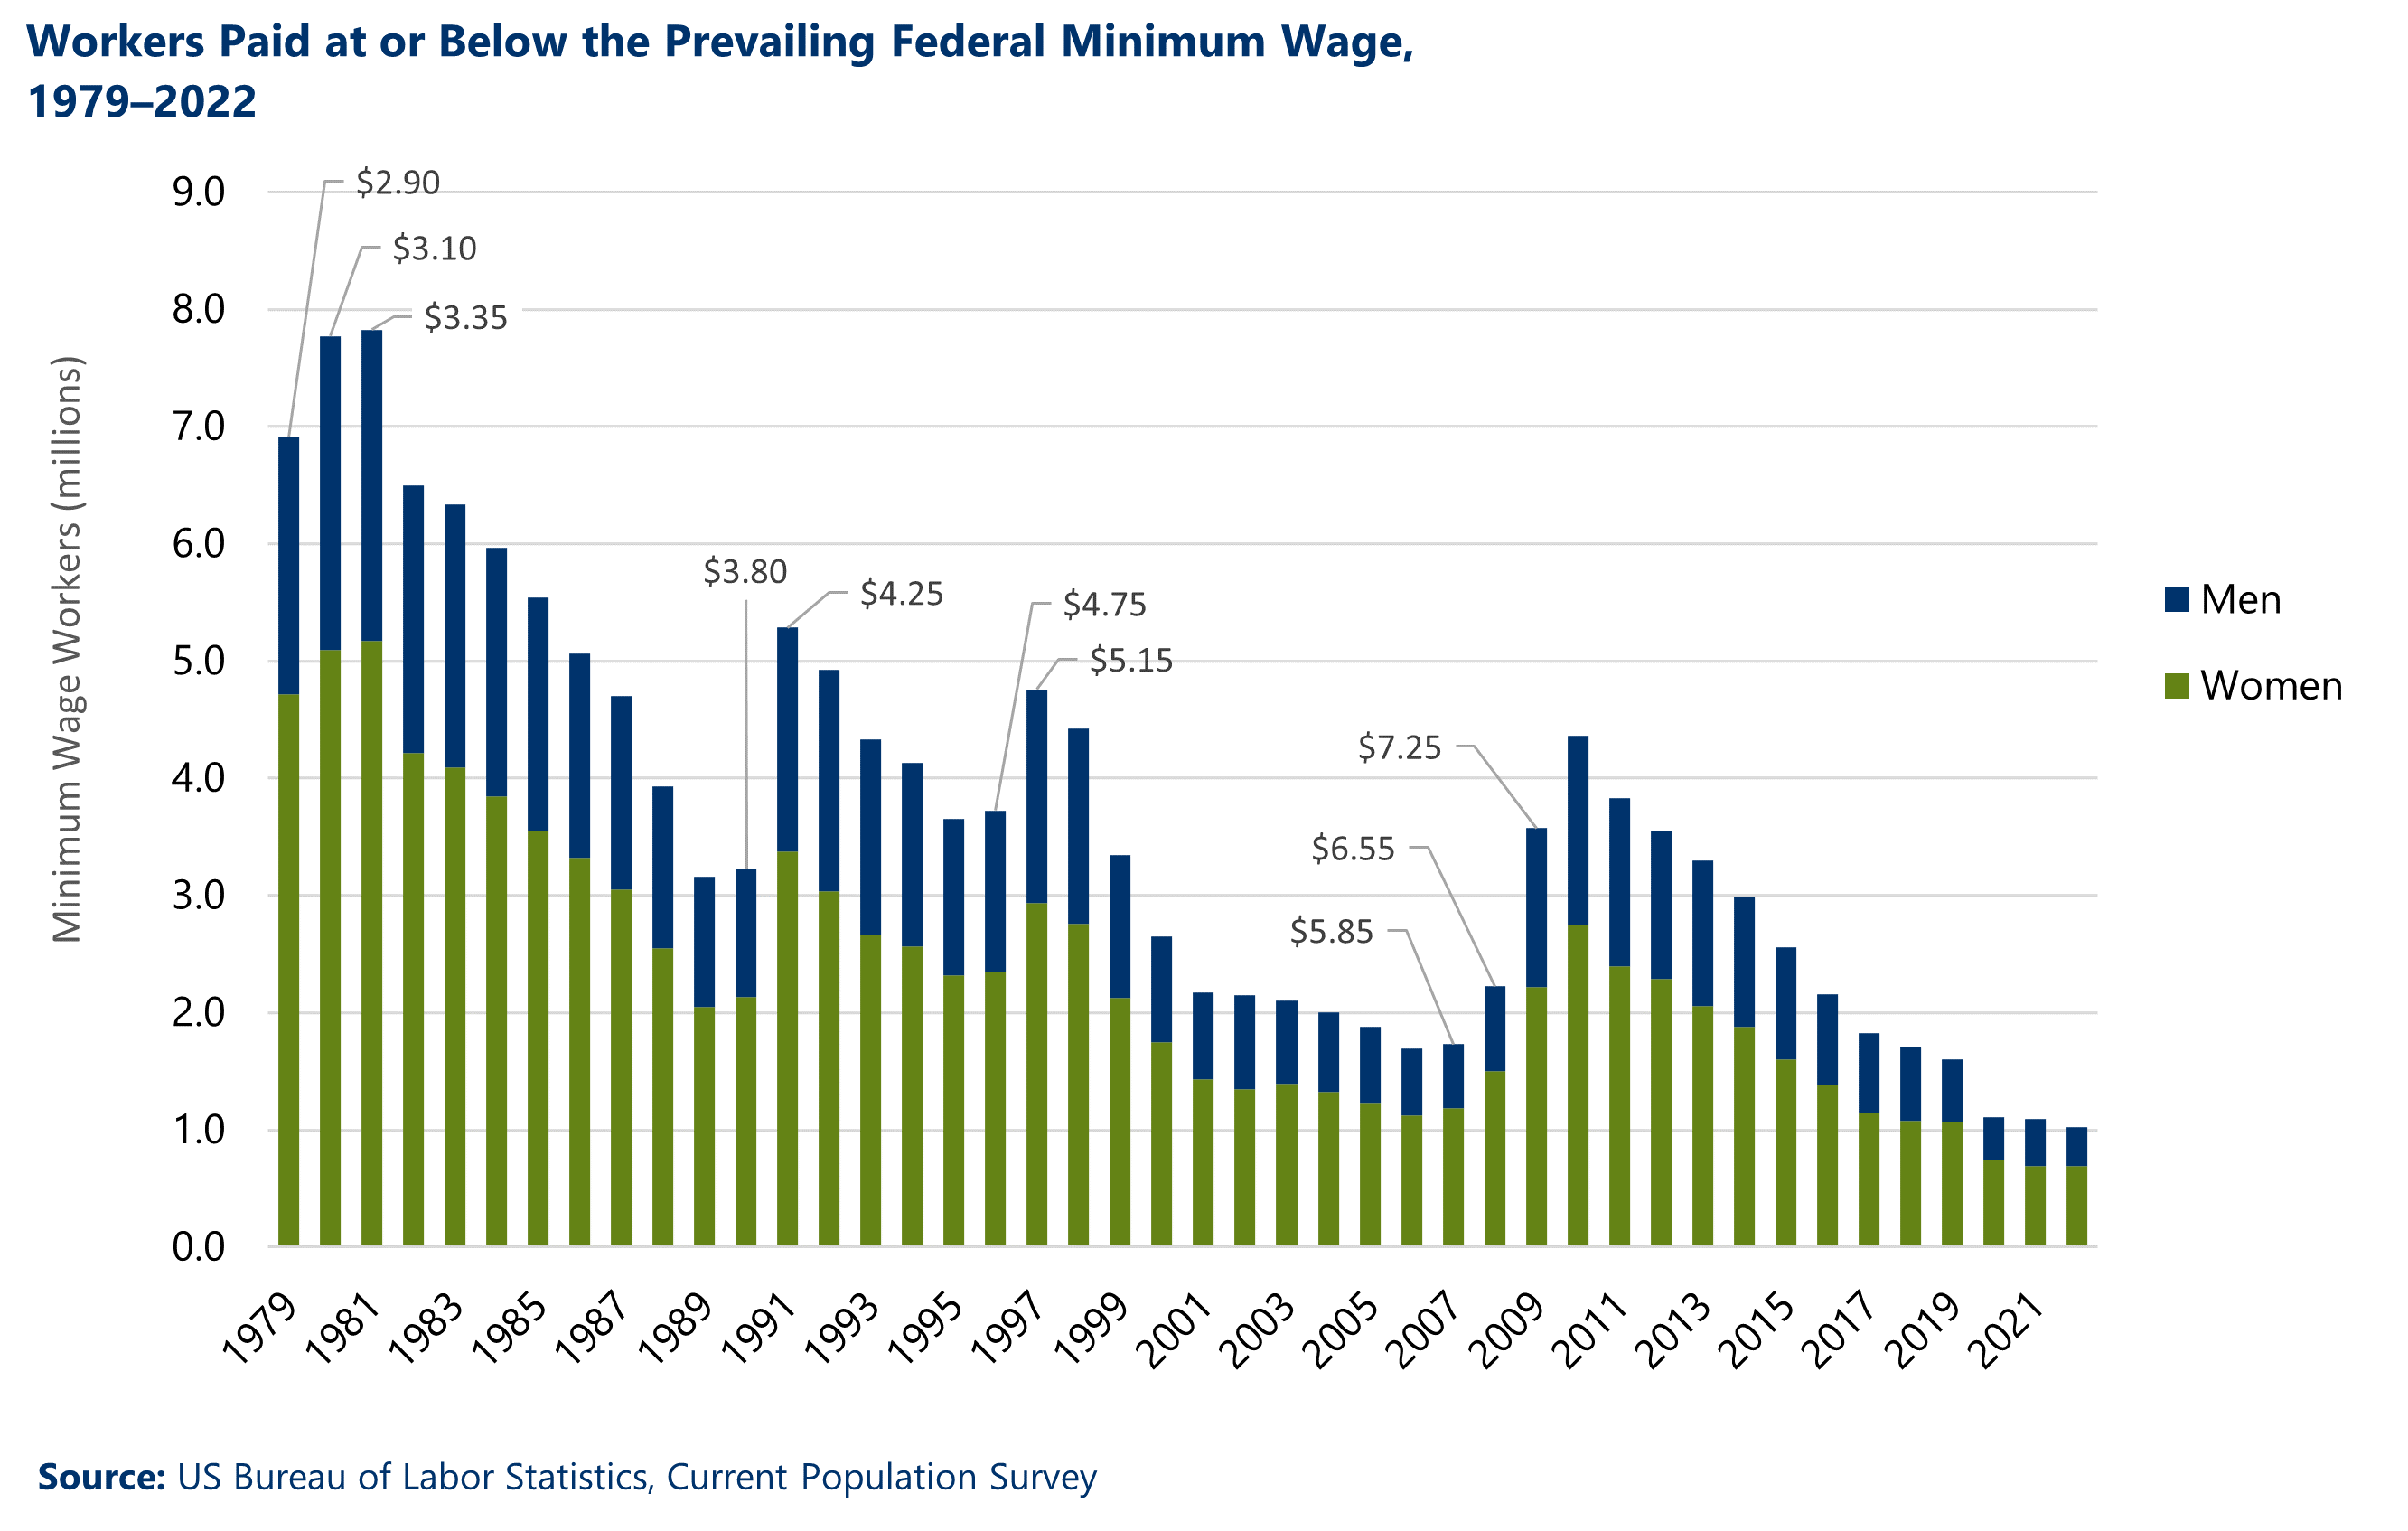 Bar chart showing the number of workers paid at or below the prevailing federal minimum wage from 1979 to 2022